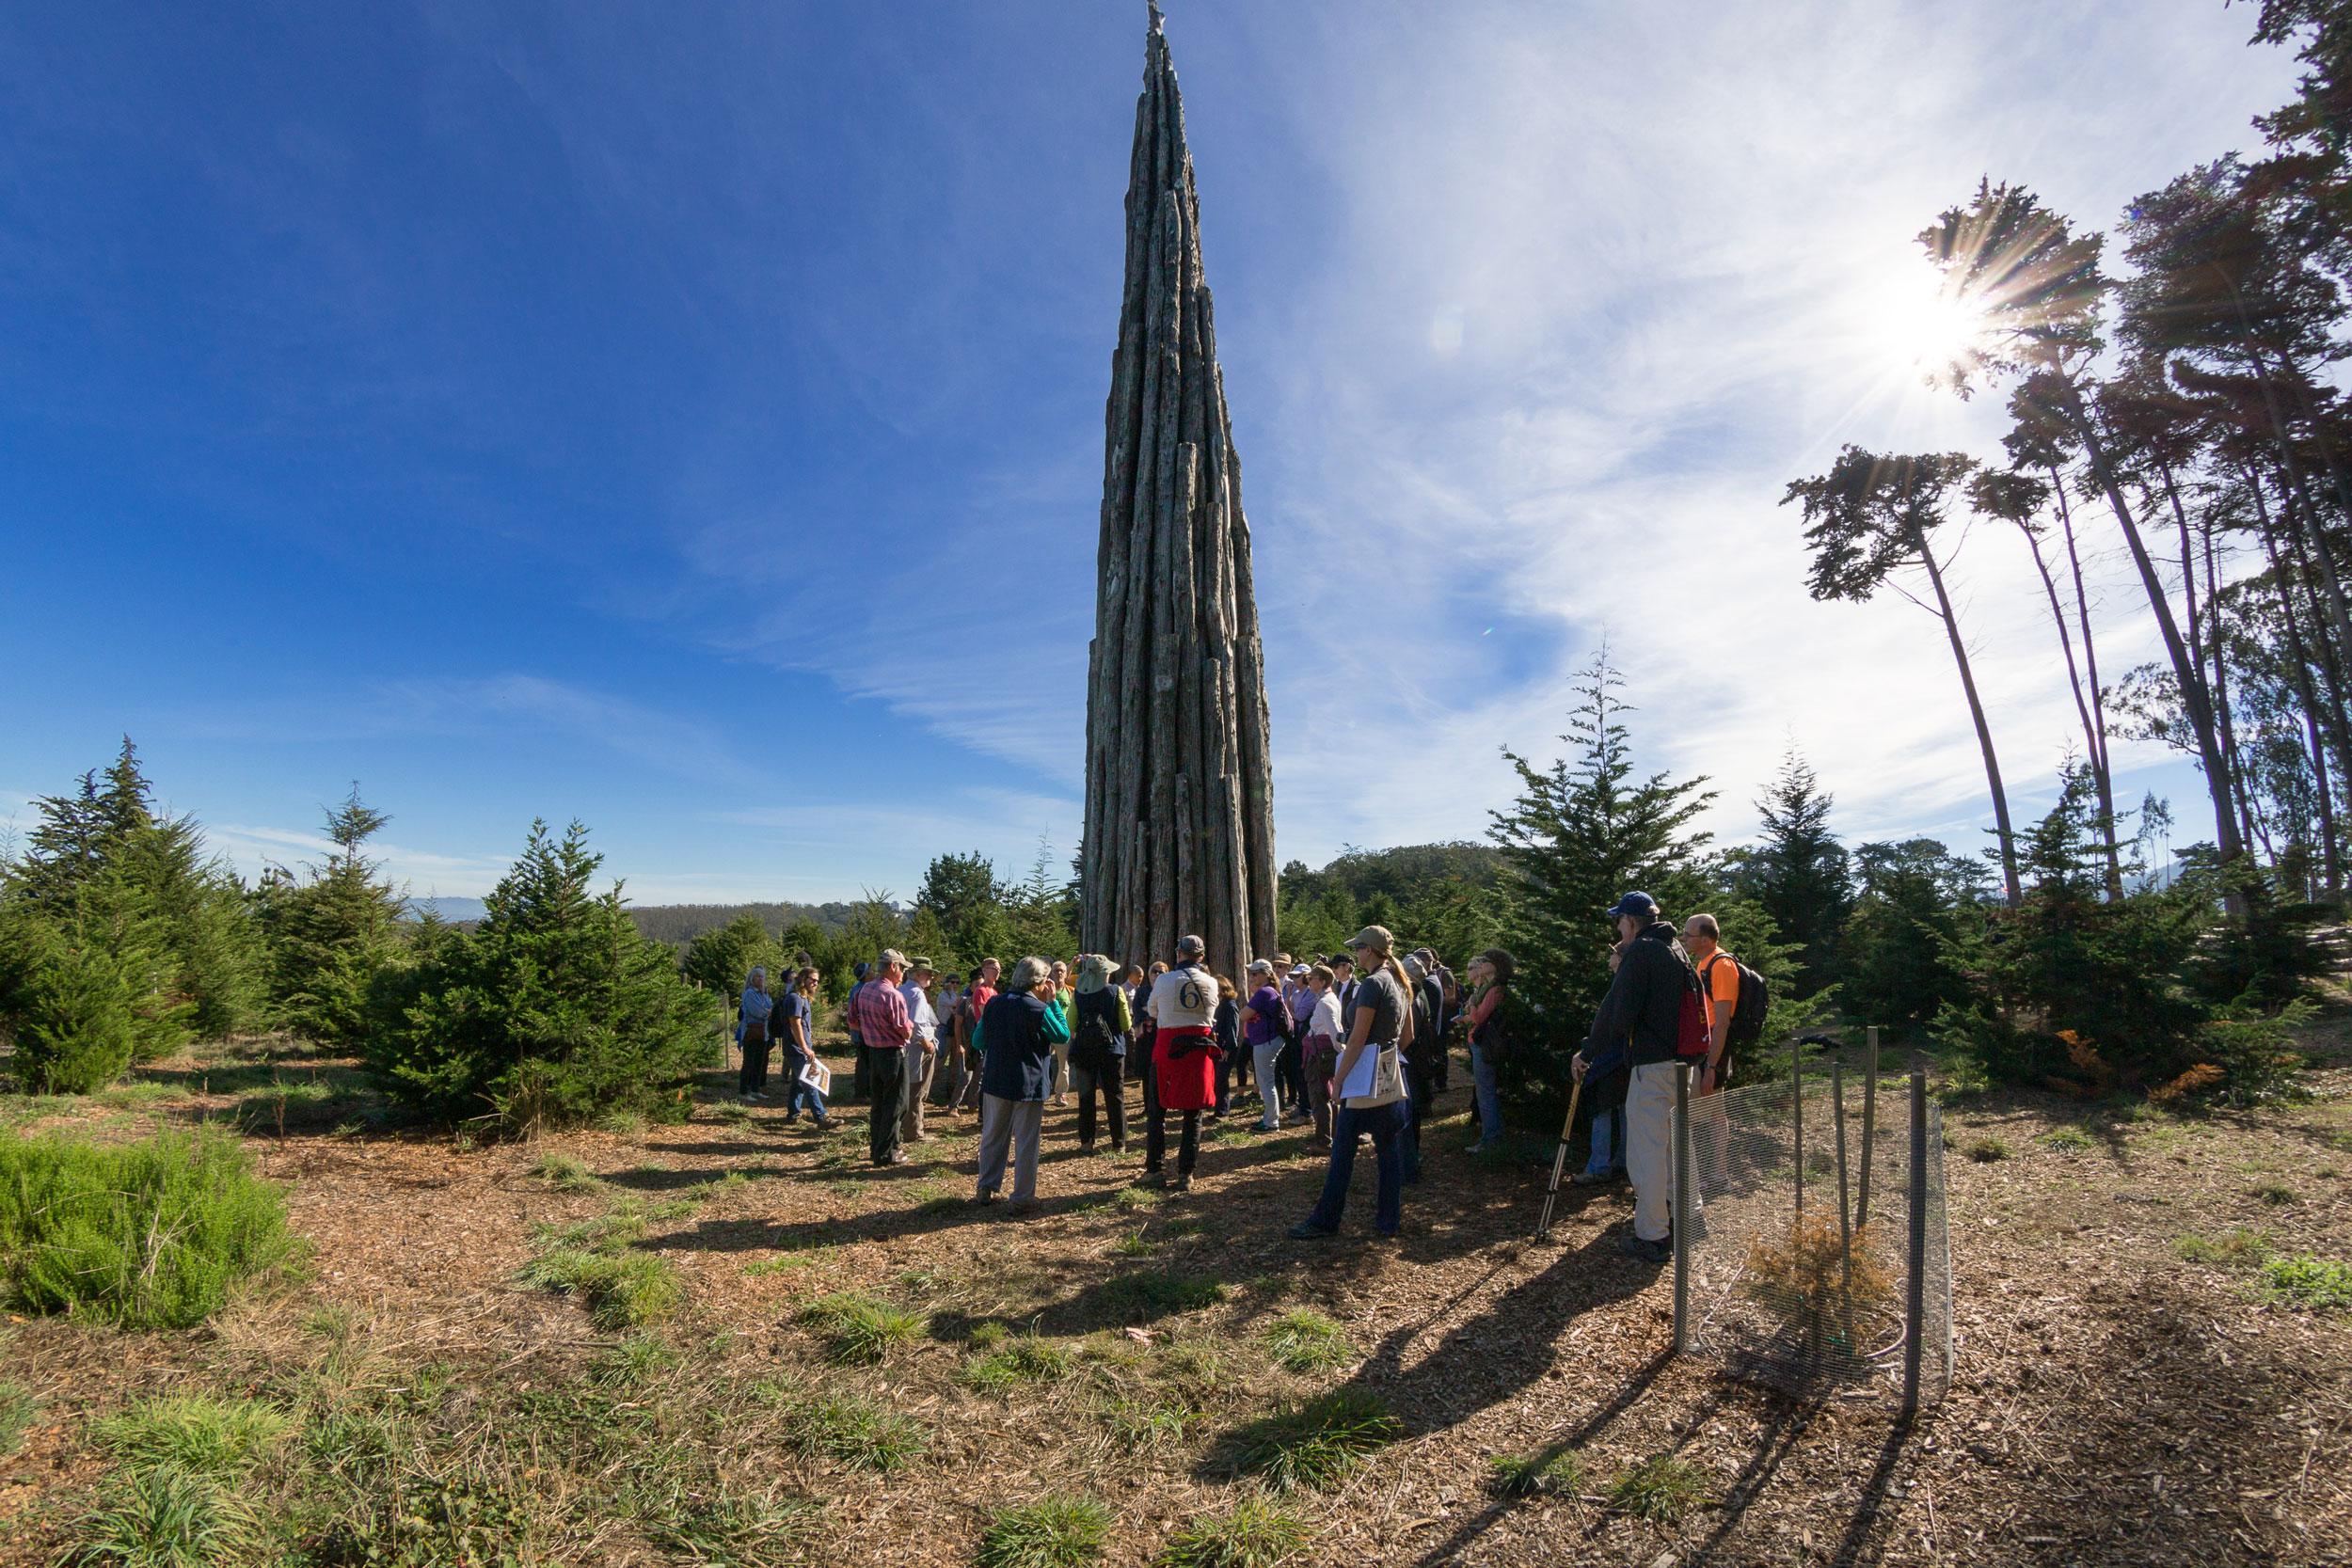 Group of visitors in front of tall Spire art